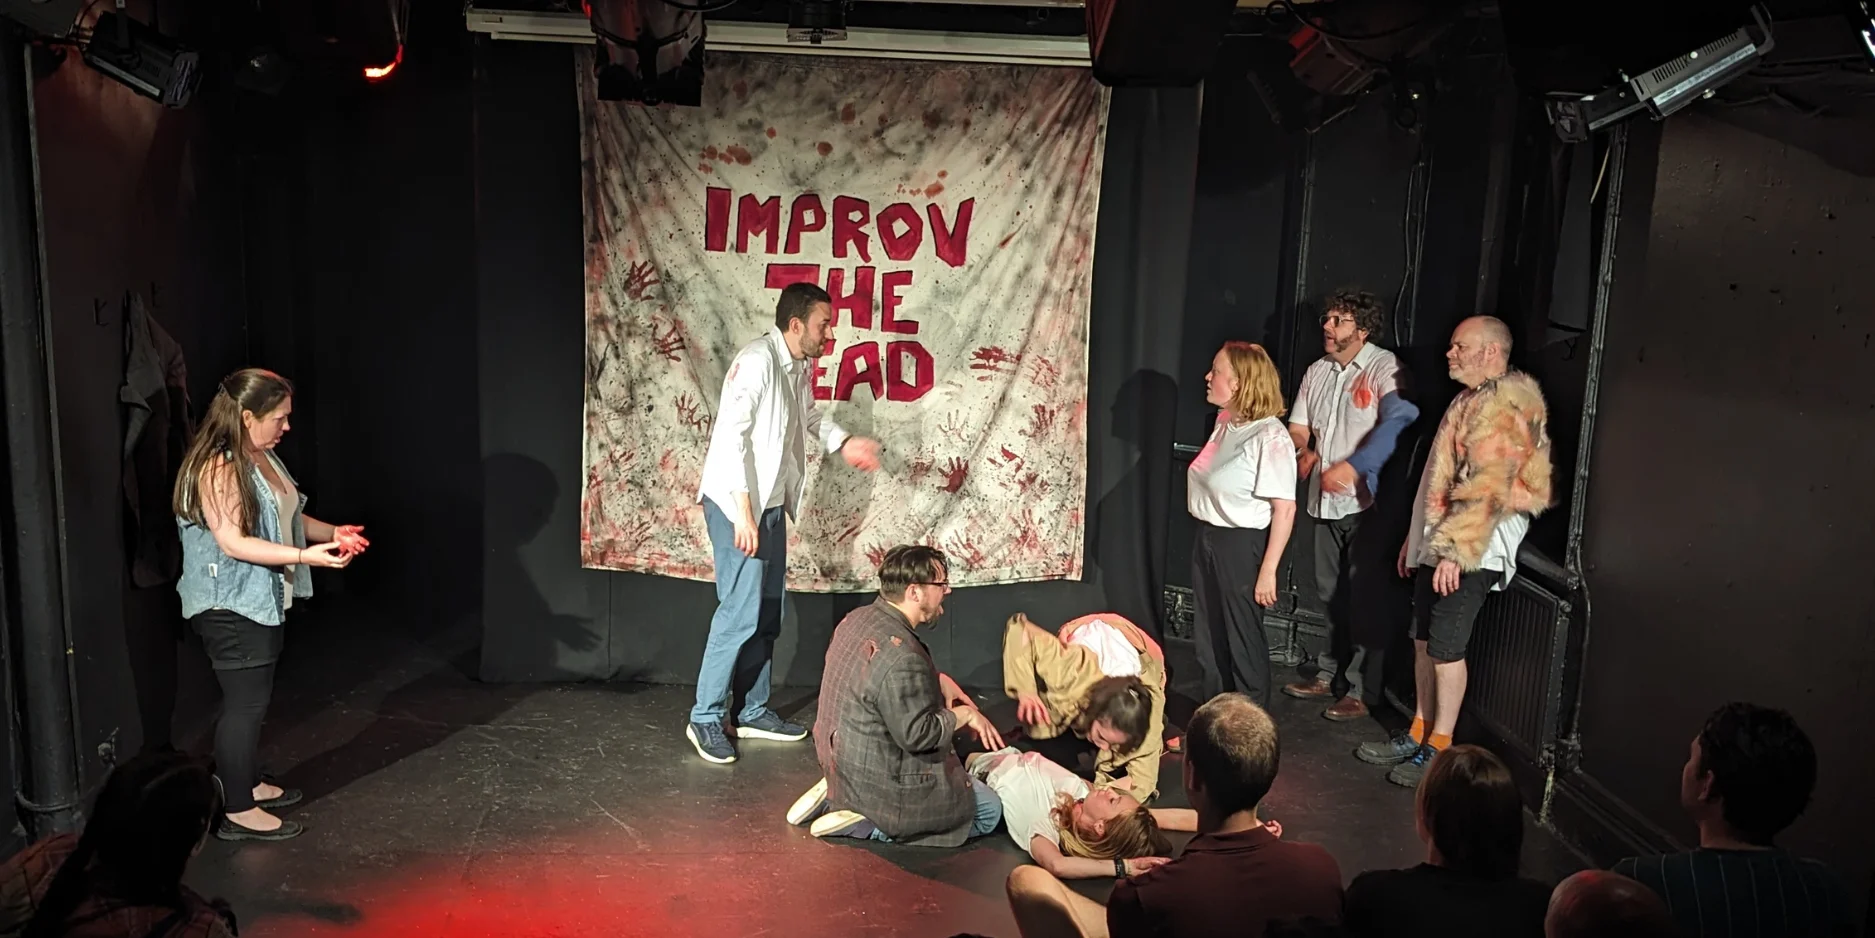 Improv the dead performing improv on stage. Actors are pretending to eat a corpse whilst covered in blood 